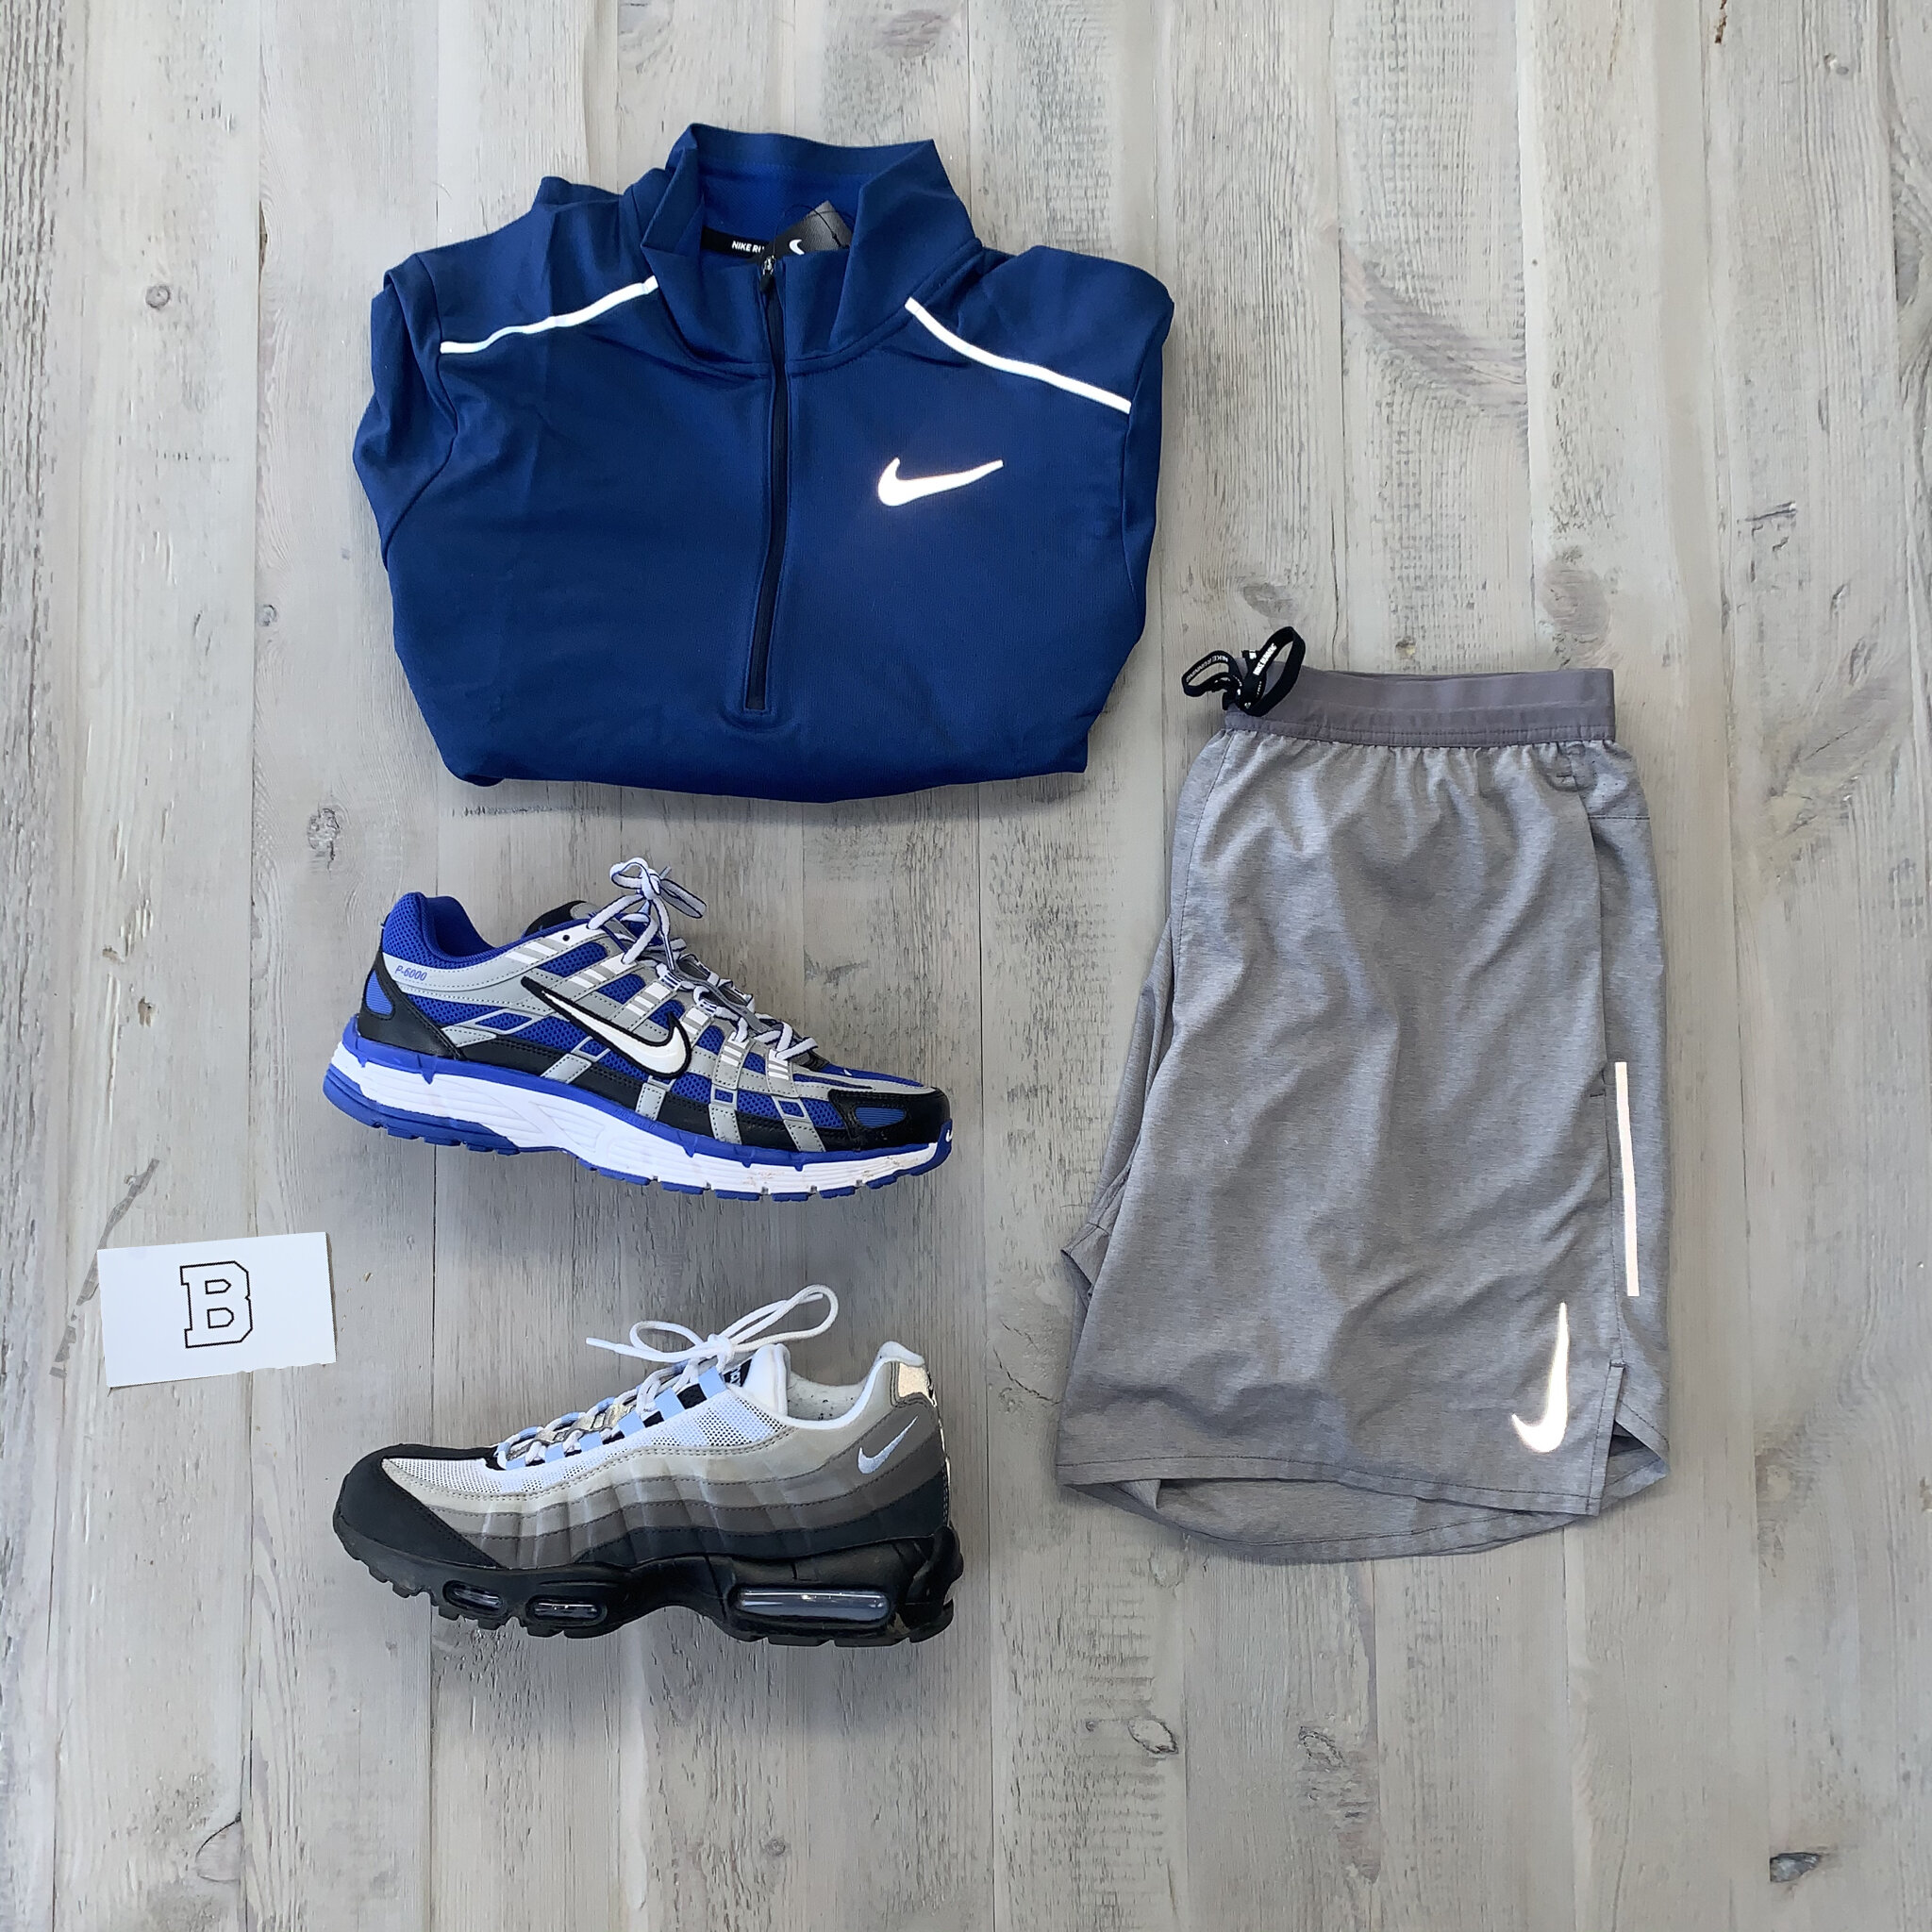 nike p6000 outfit